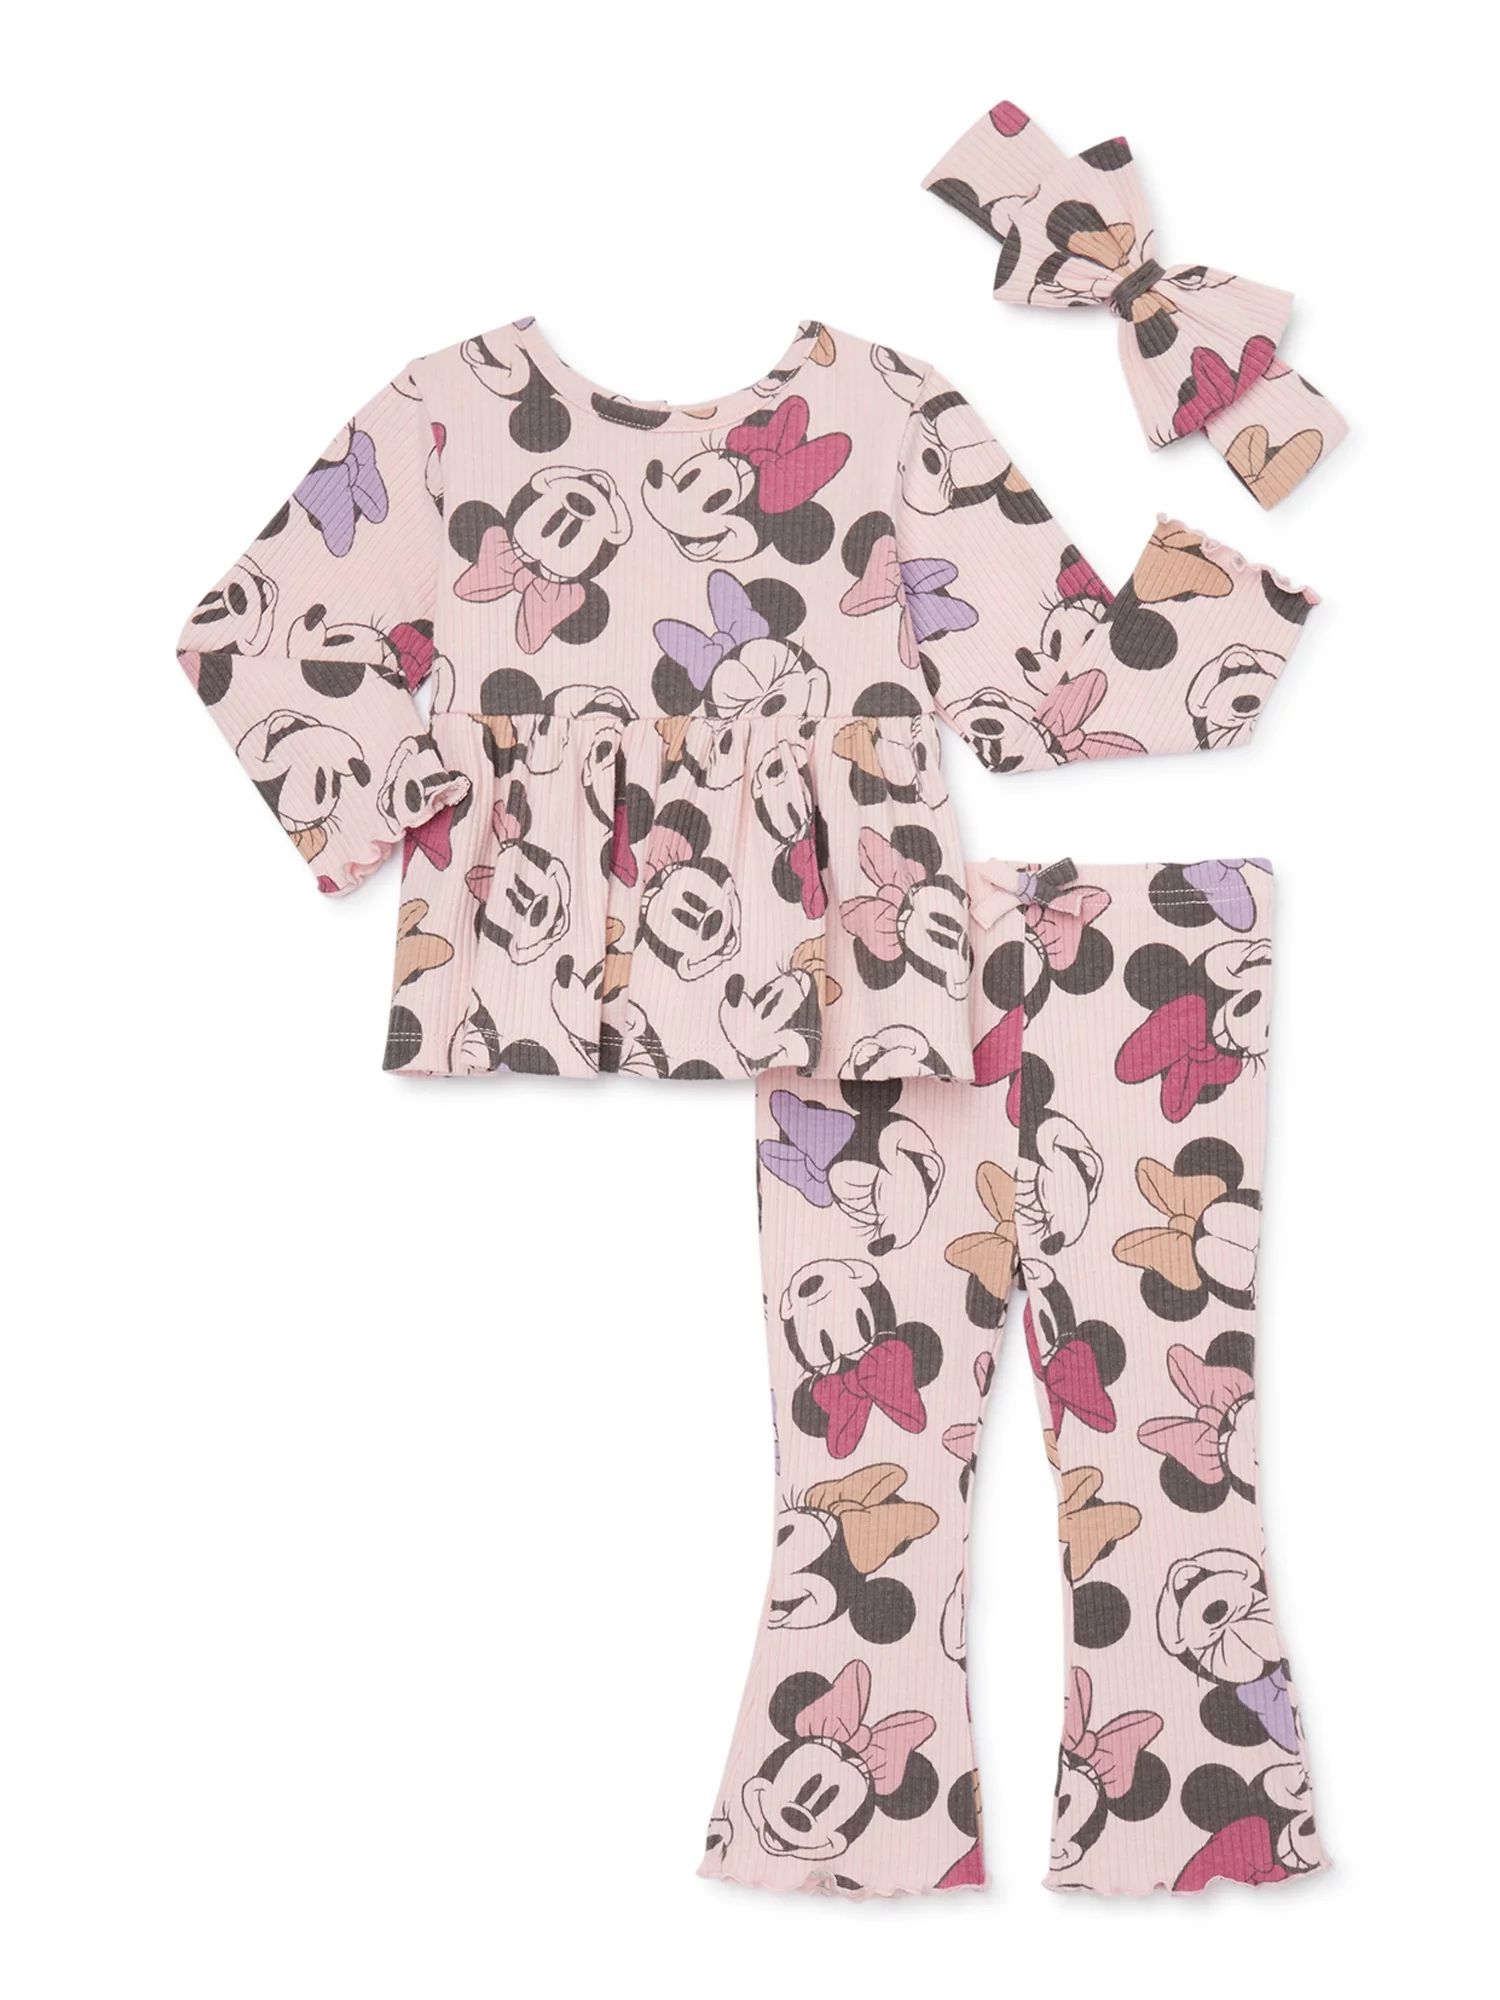 Disney Minnie Mouse Baby Girls Top, Pants and Headband, 3-Piece Set, Sizes 0/3-24 Months | Walmart (US)